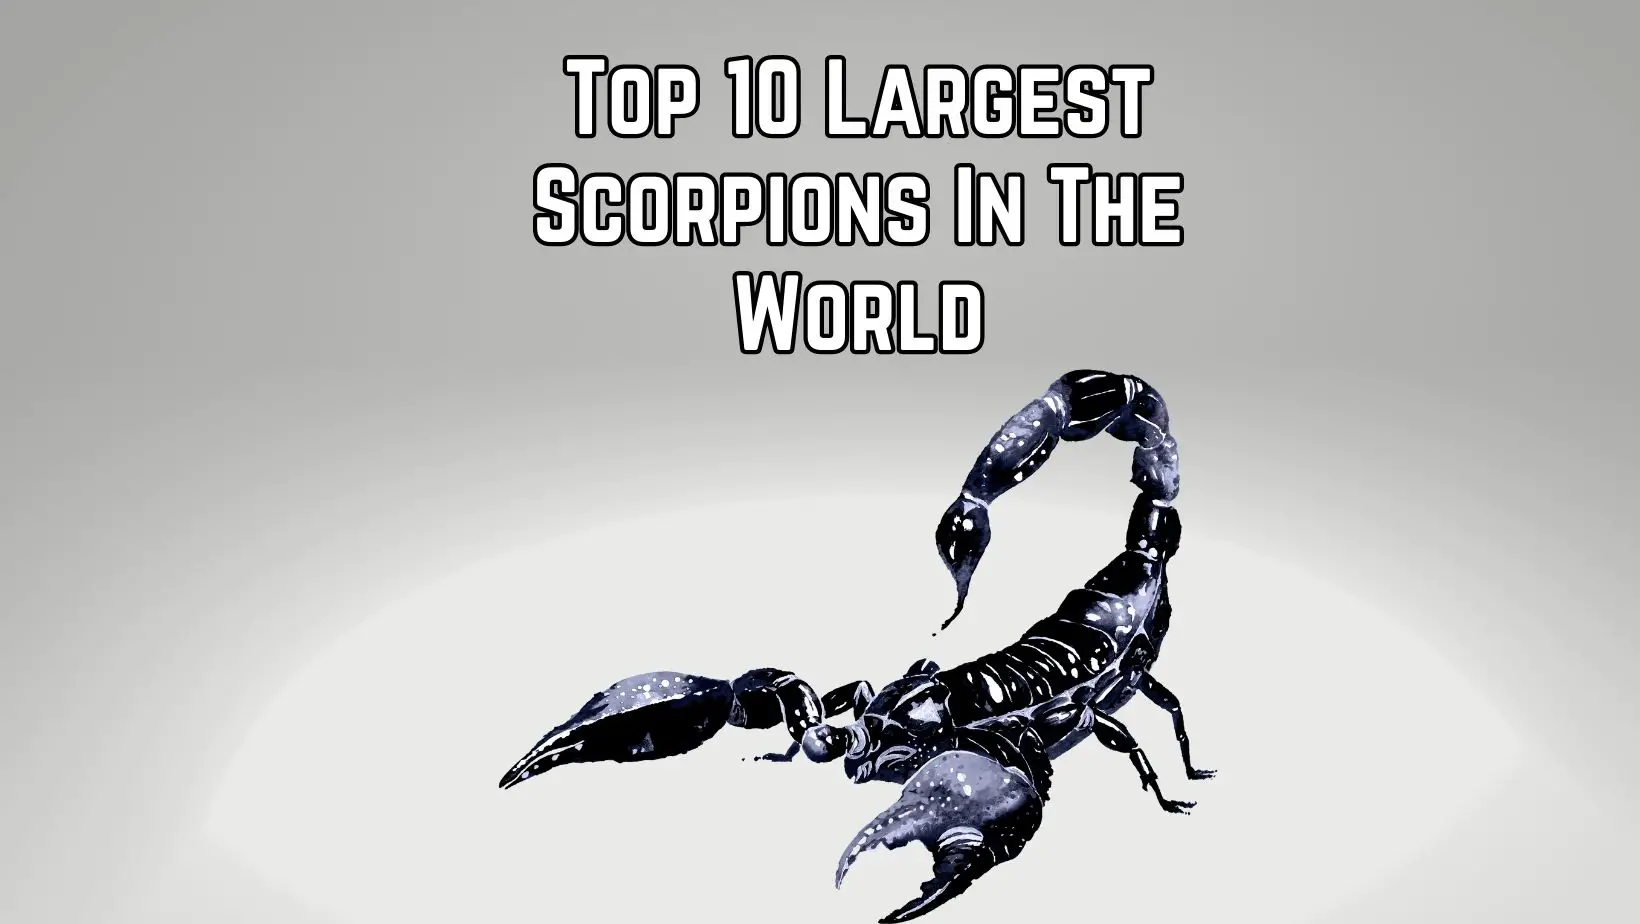 Top 10 Largest Scorpions In The World